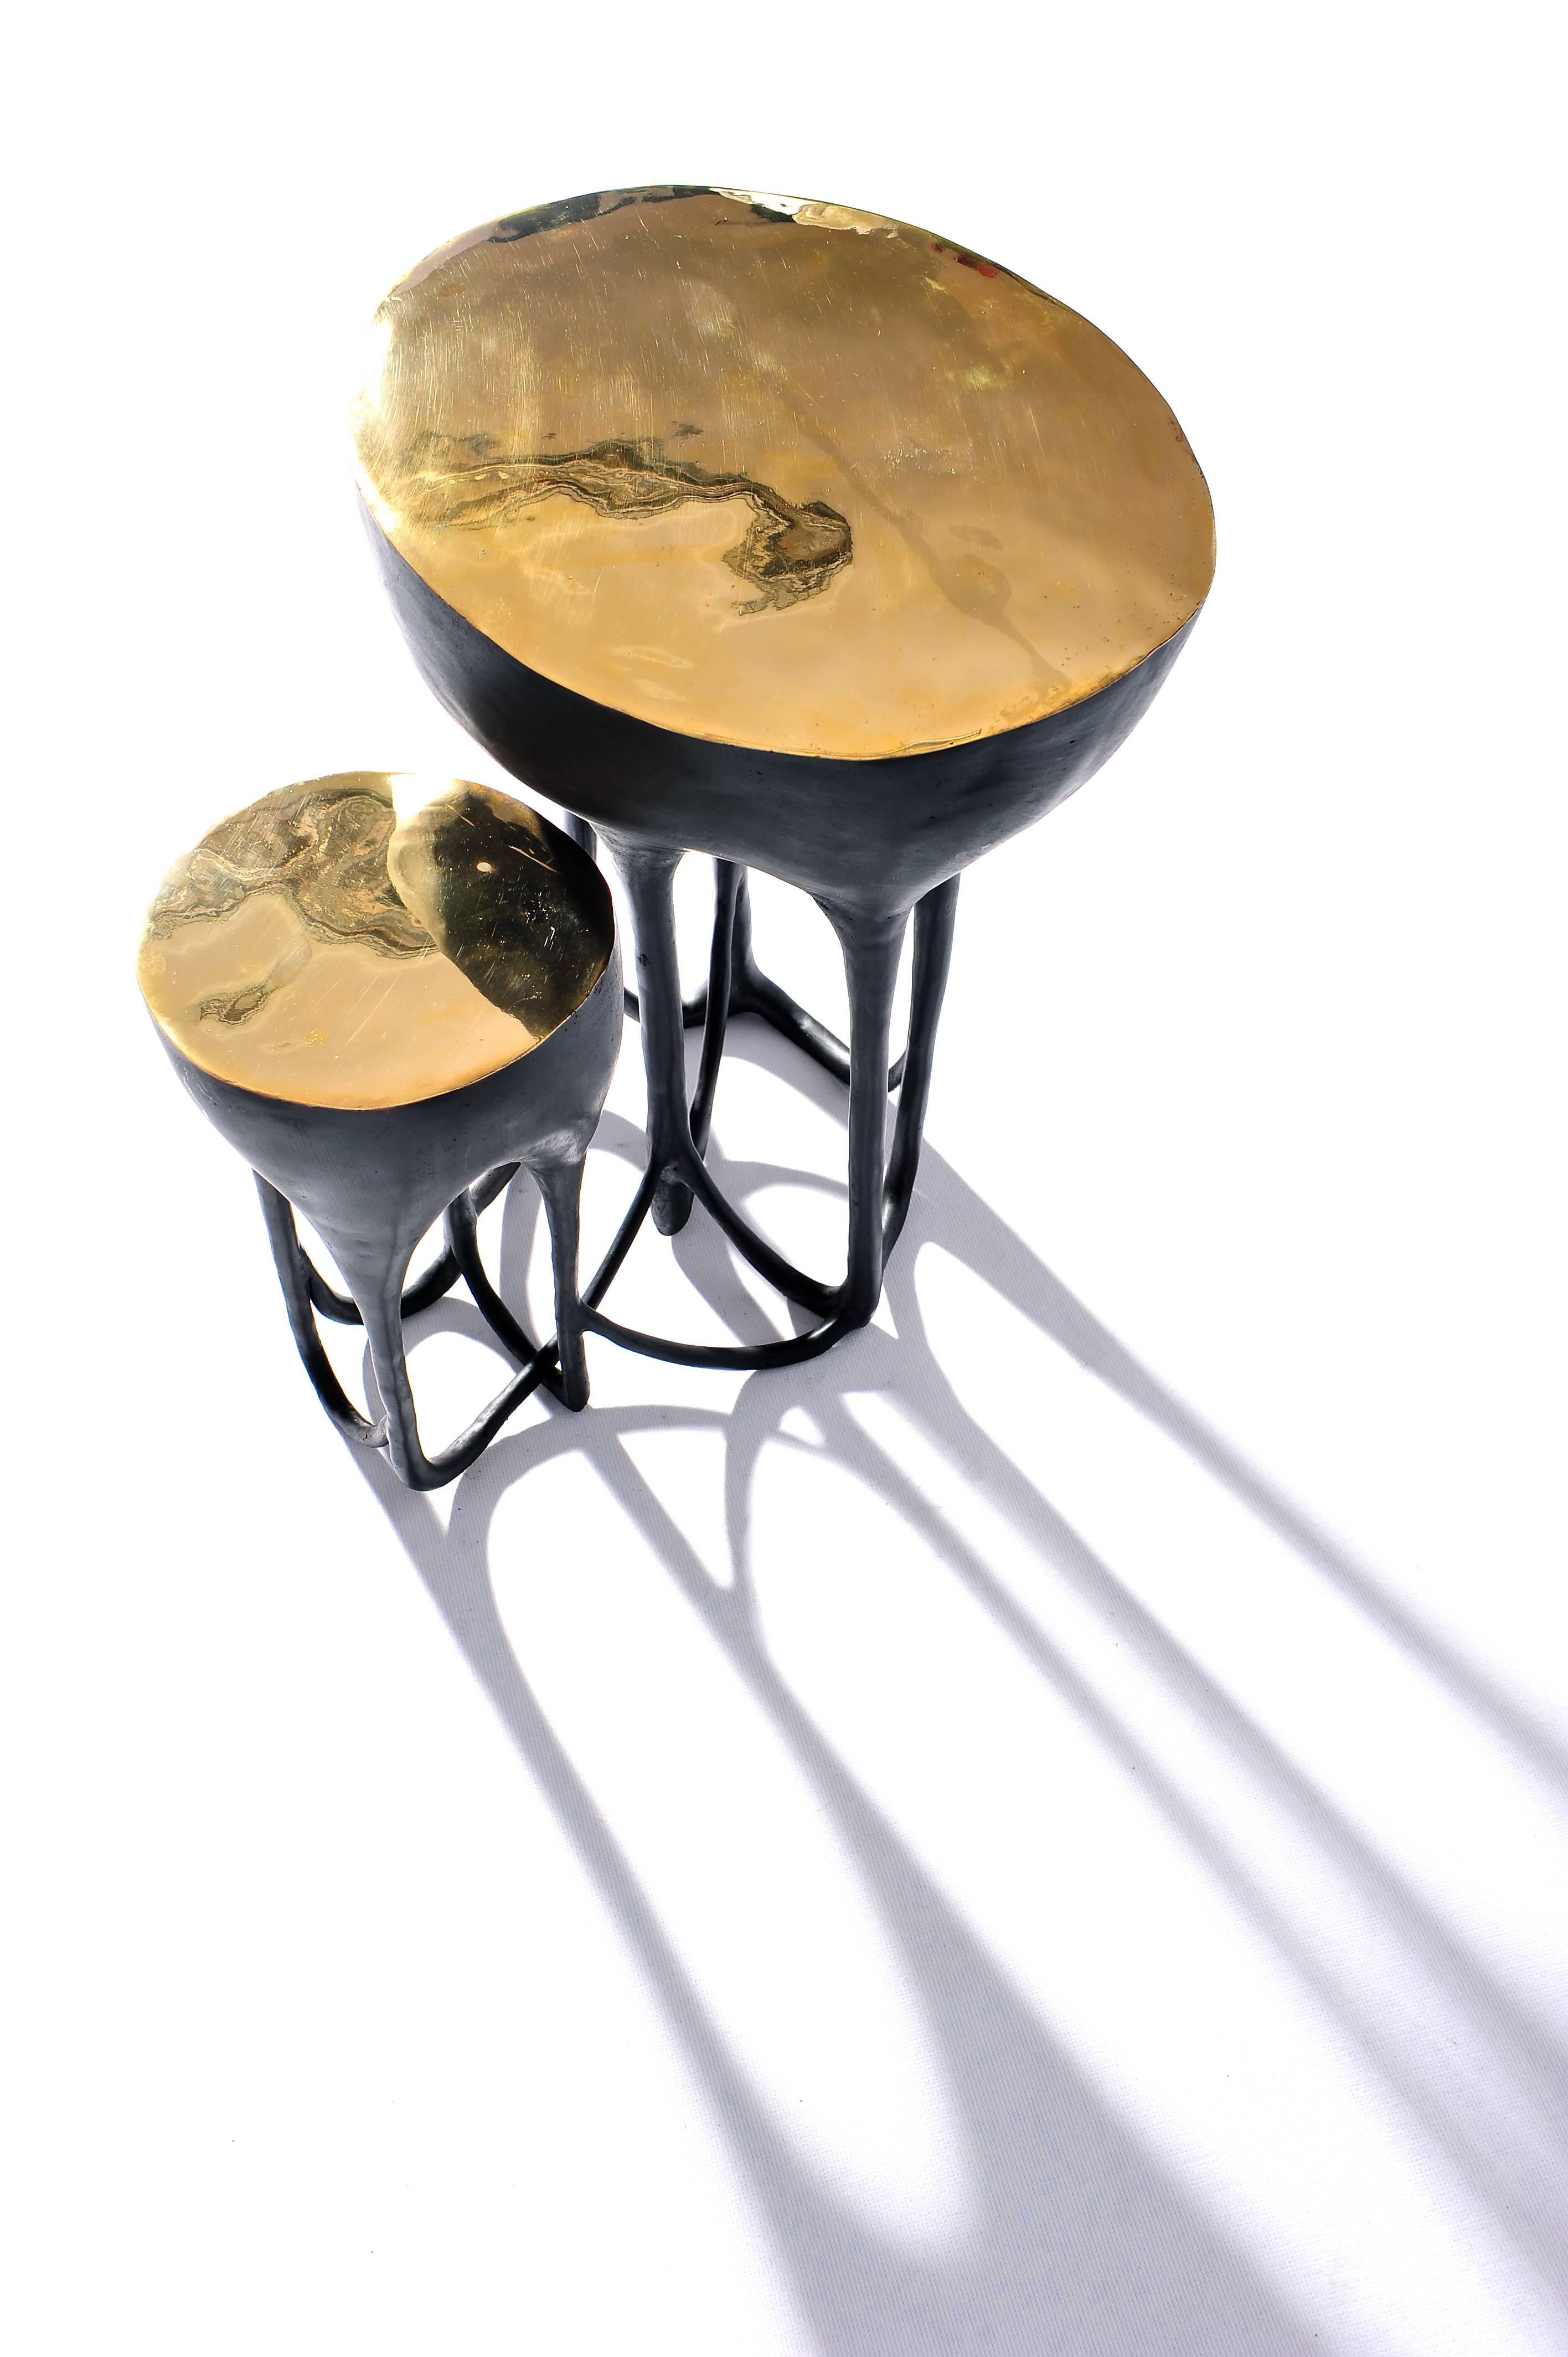 Brass hand-sculpted side table by Misaya.
Brass hand-sculpted side table.
Dimensions: H 50 x W 43 x L 50 cm.
Masaya is our brand's collection which combines stylishly refined designs with the purity of solid wood & marble tops and bronze bases.